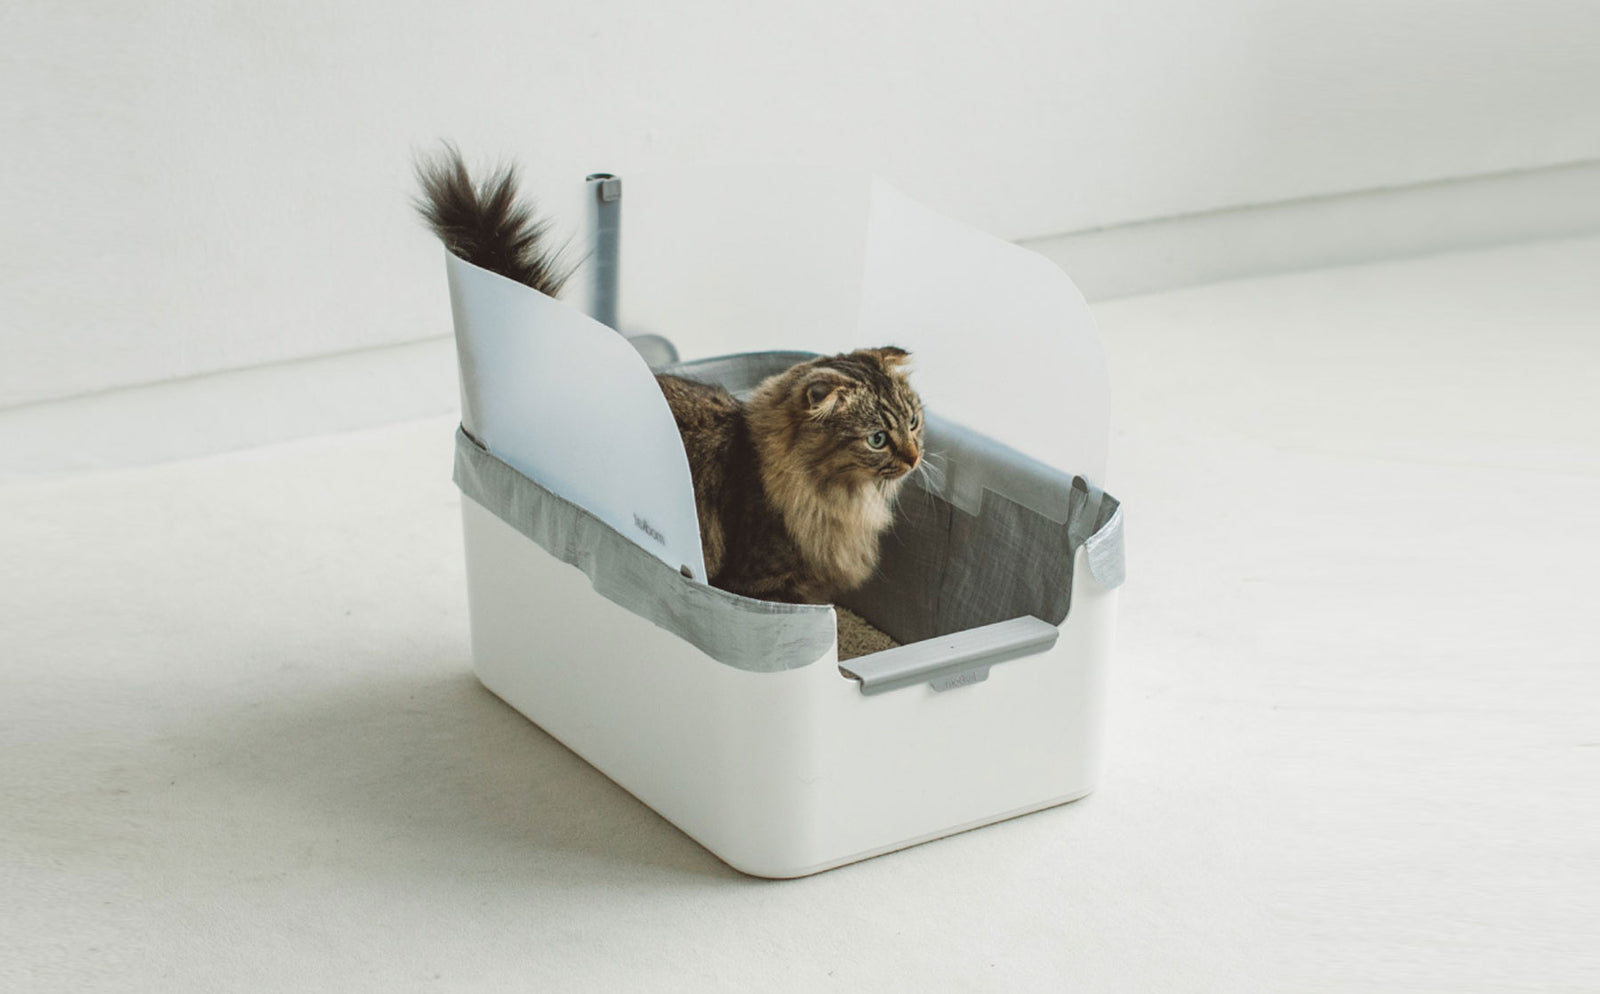 Tips for Cleaning a Litter Box and Litter Box Odor Control